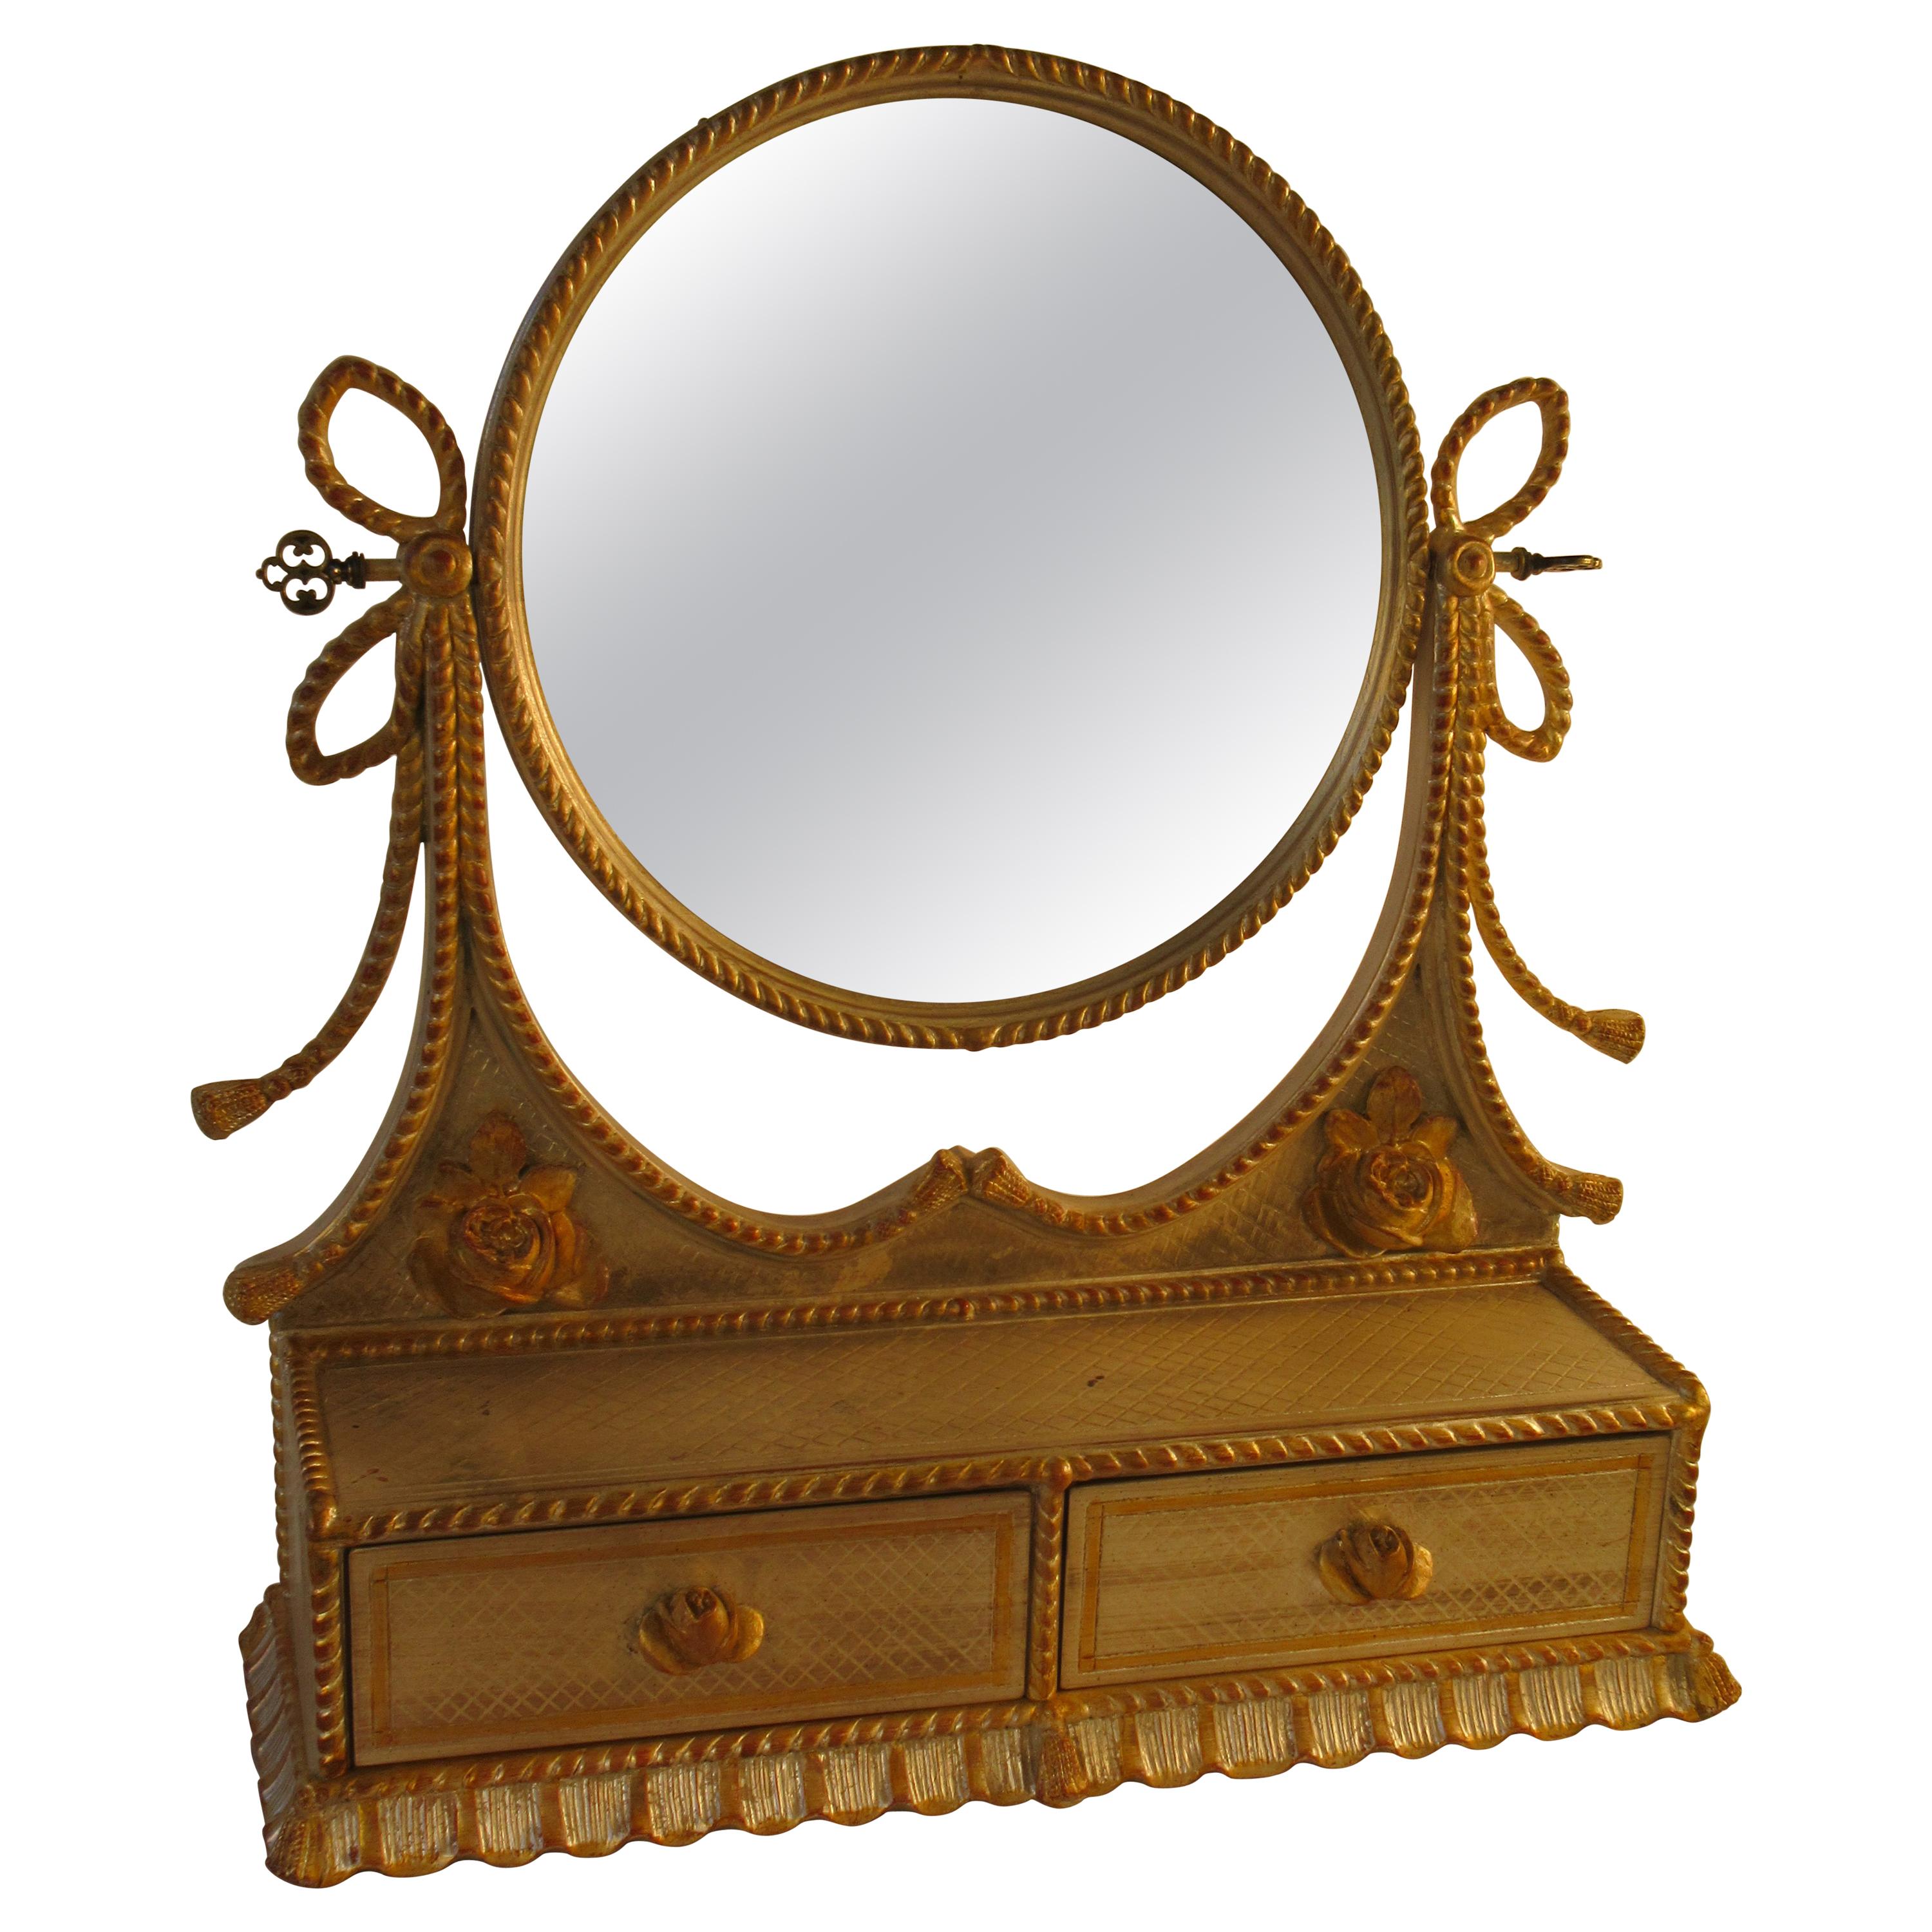 1960s Italian Silver and Gold-Painted Vanity Mirror